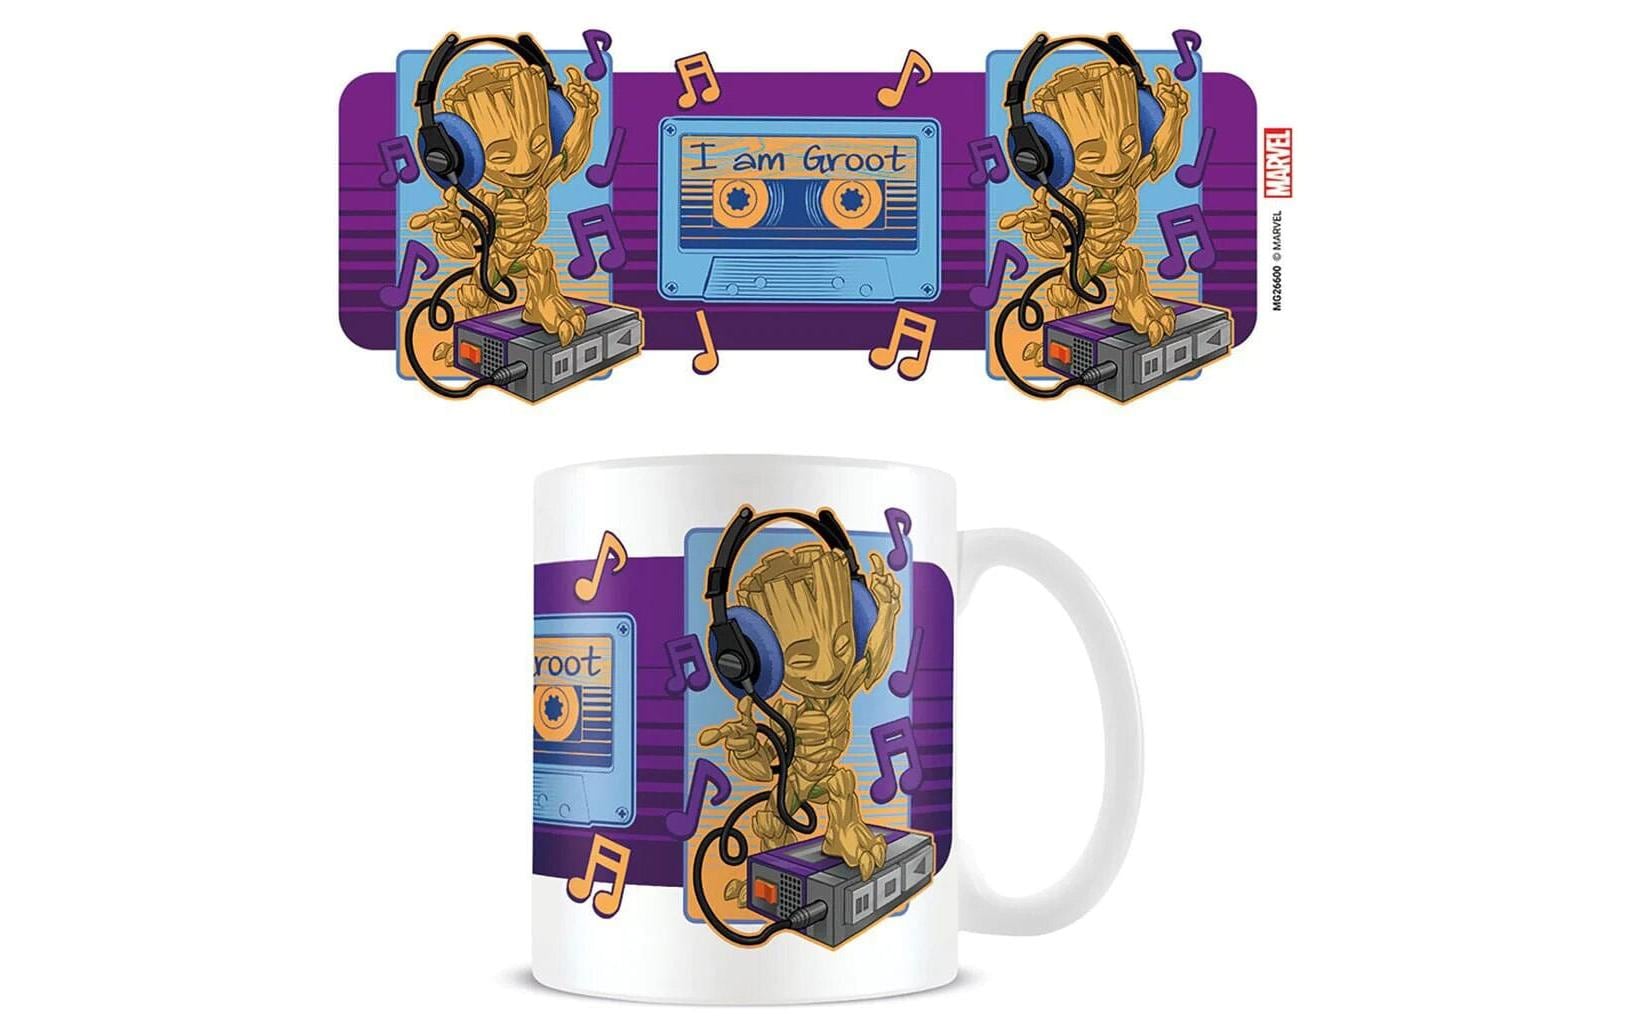 Pyramid Marvel Guardians of the Galaxy Groot Cassette Tasse